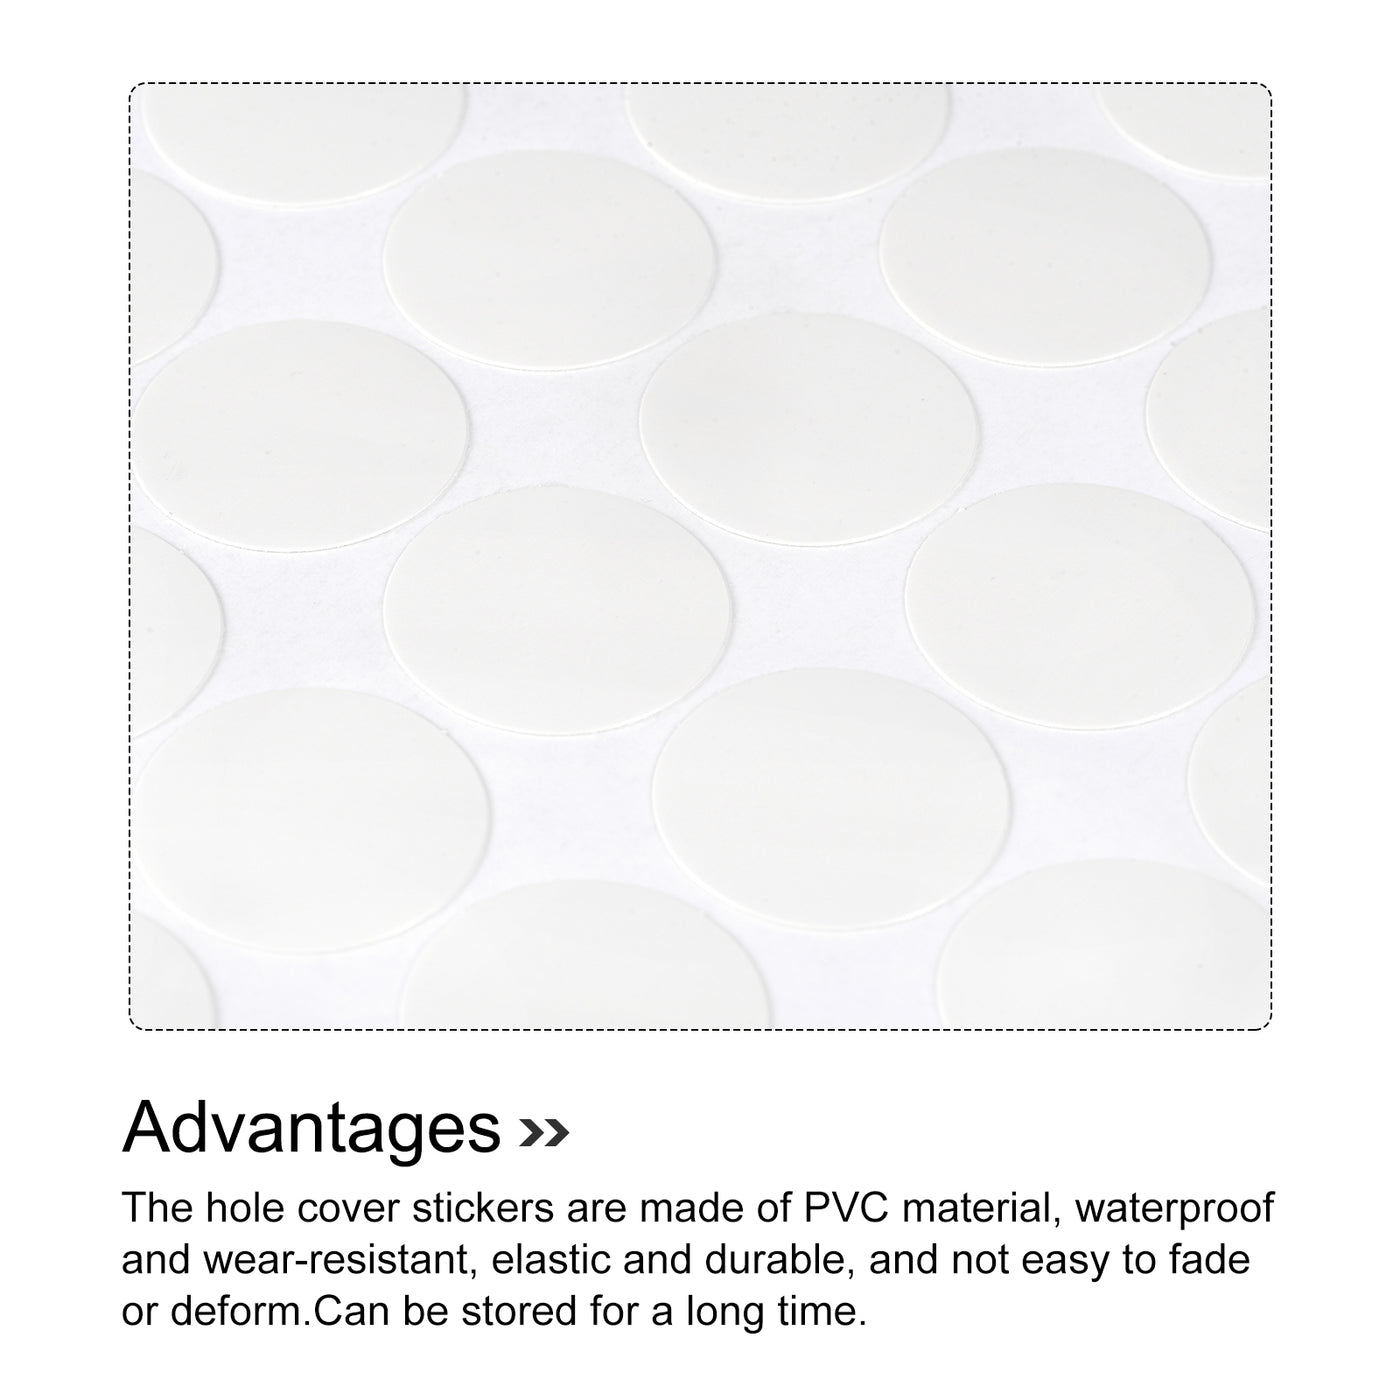 uxcell Uxcell Screw Hole Cover Stickers, 12mm Dia PVC Self Adhesive Covers Caps for Wood Furniture Cabinet Shelf Wardrobe, White 2 Sheet/280pcs